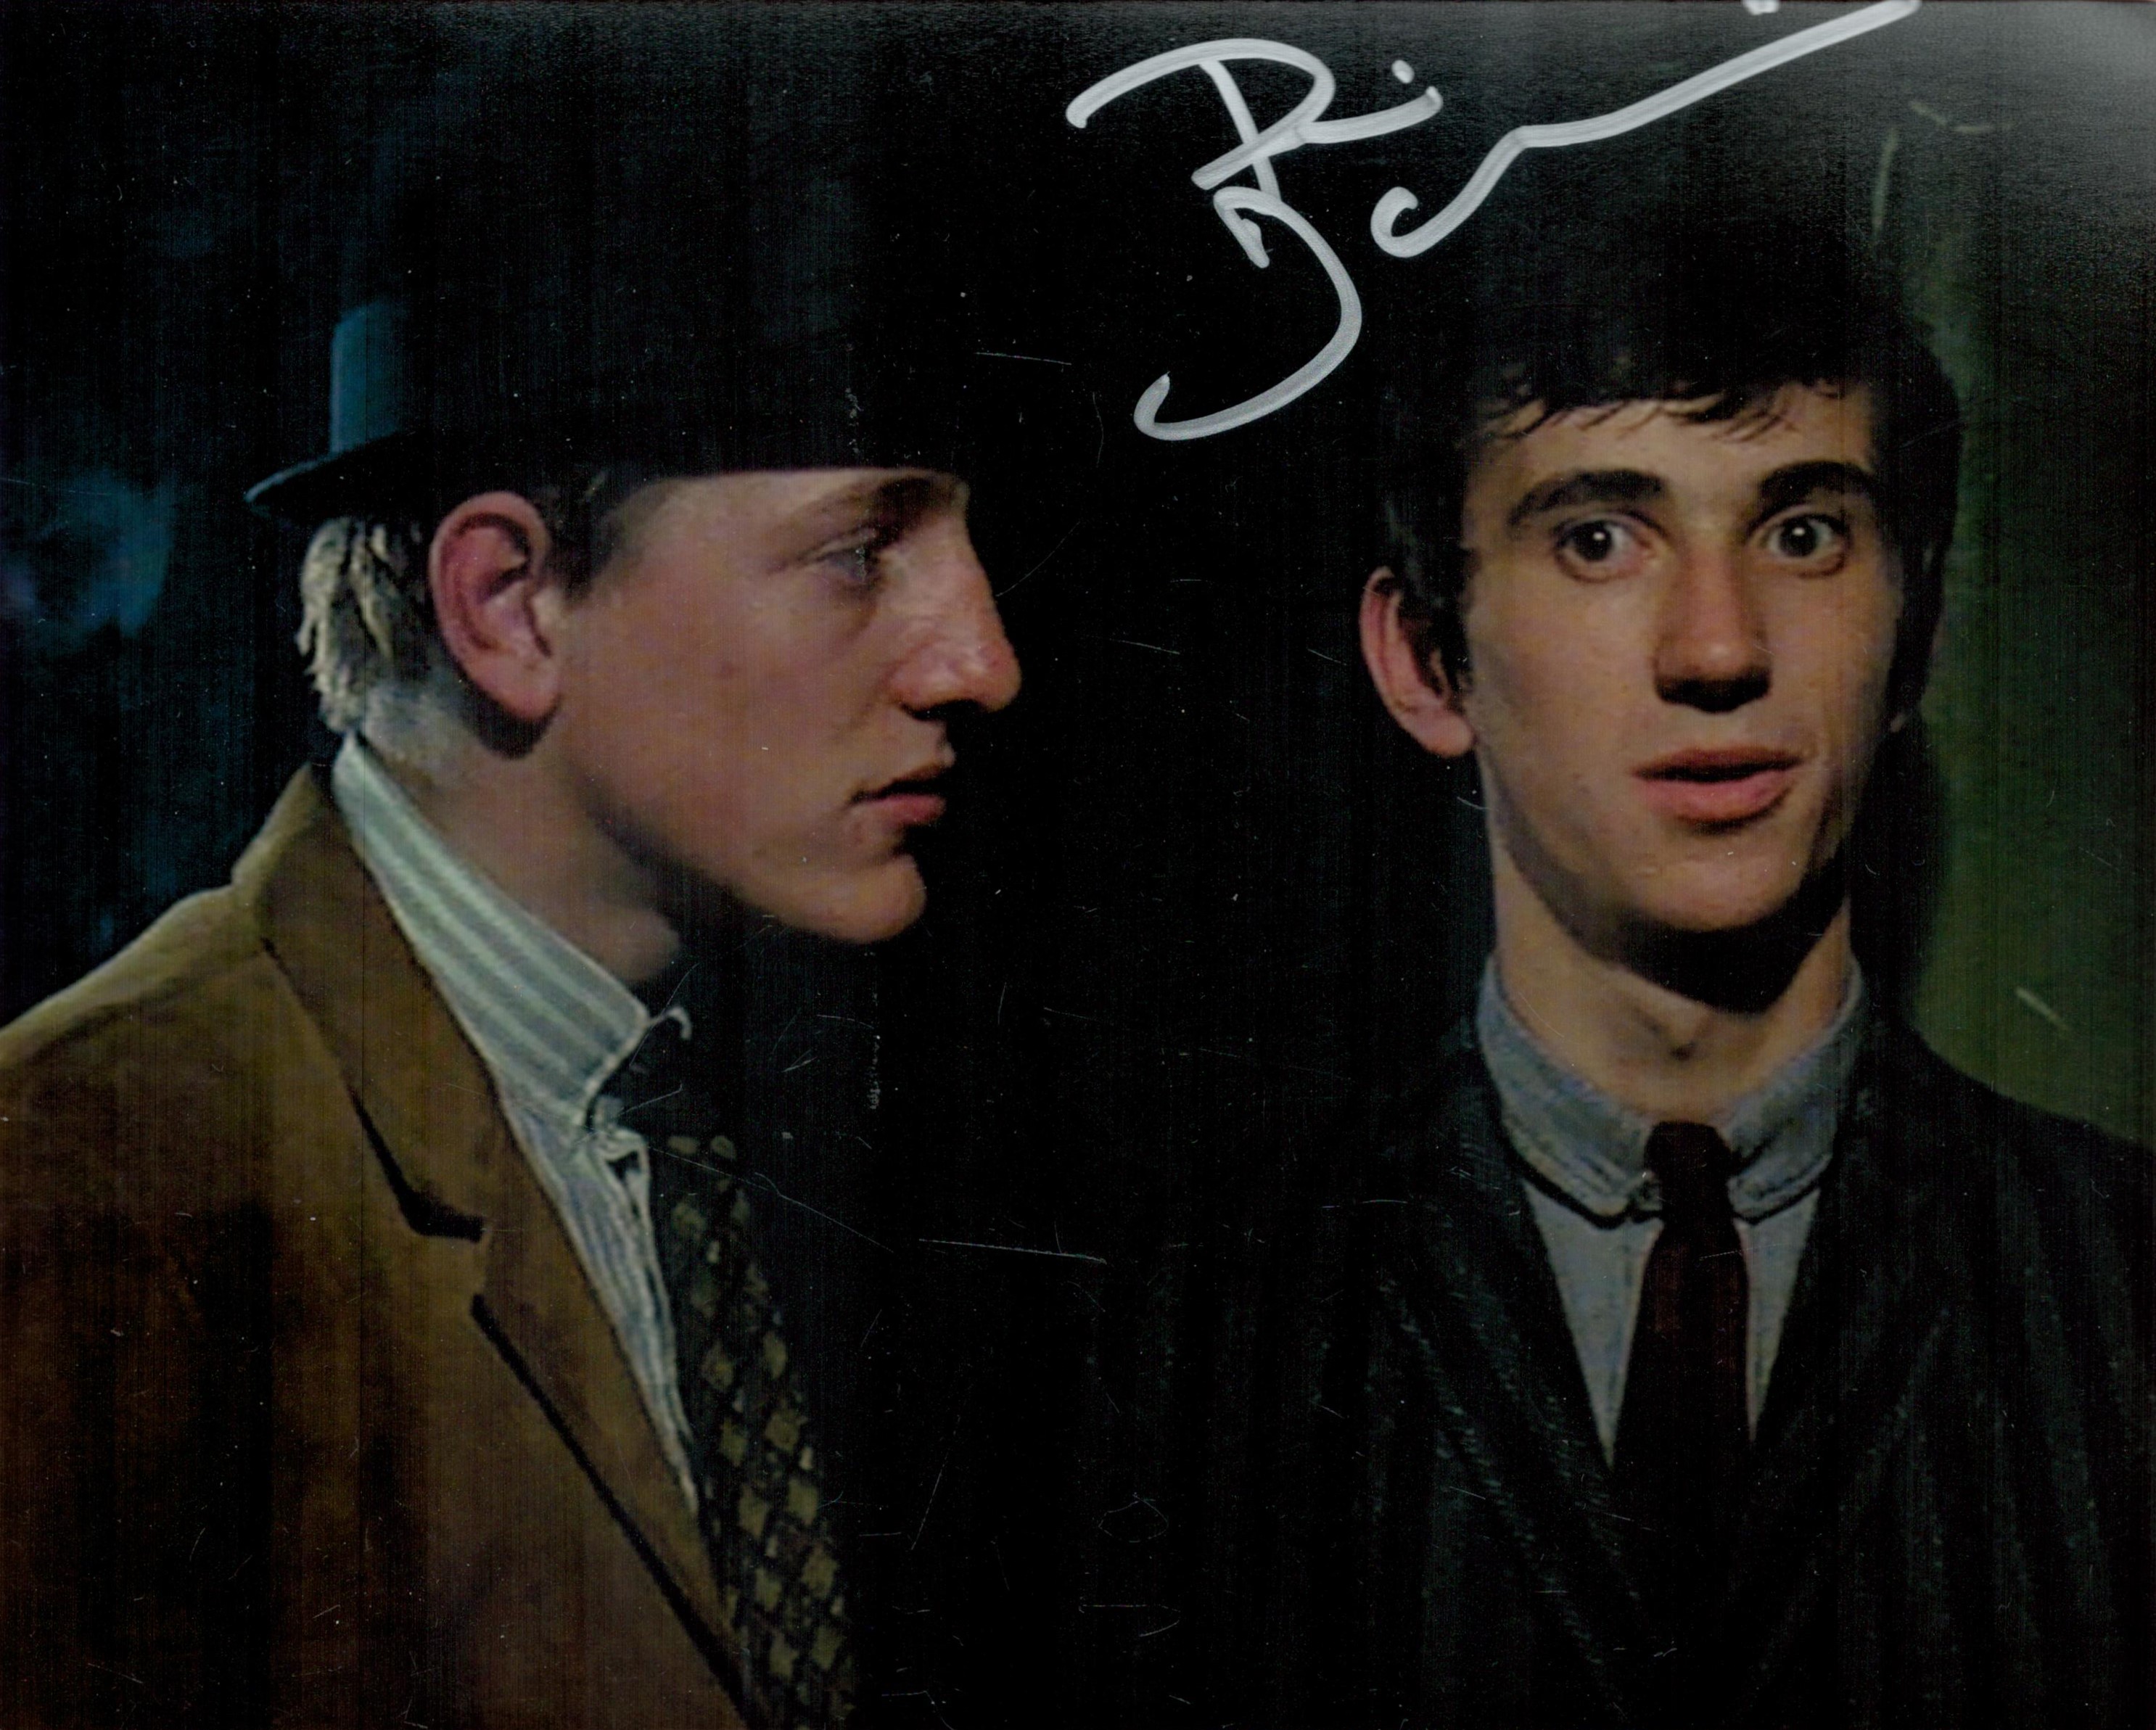 Phil Daniels signed Quadrophenia 10x8 colour photo. Daniels is an English actor, musician and